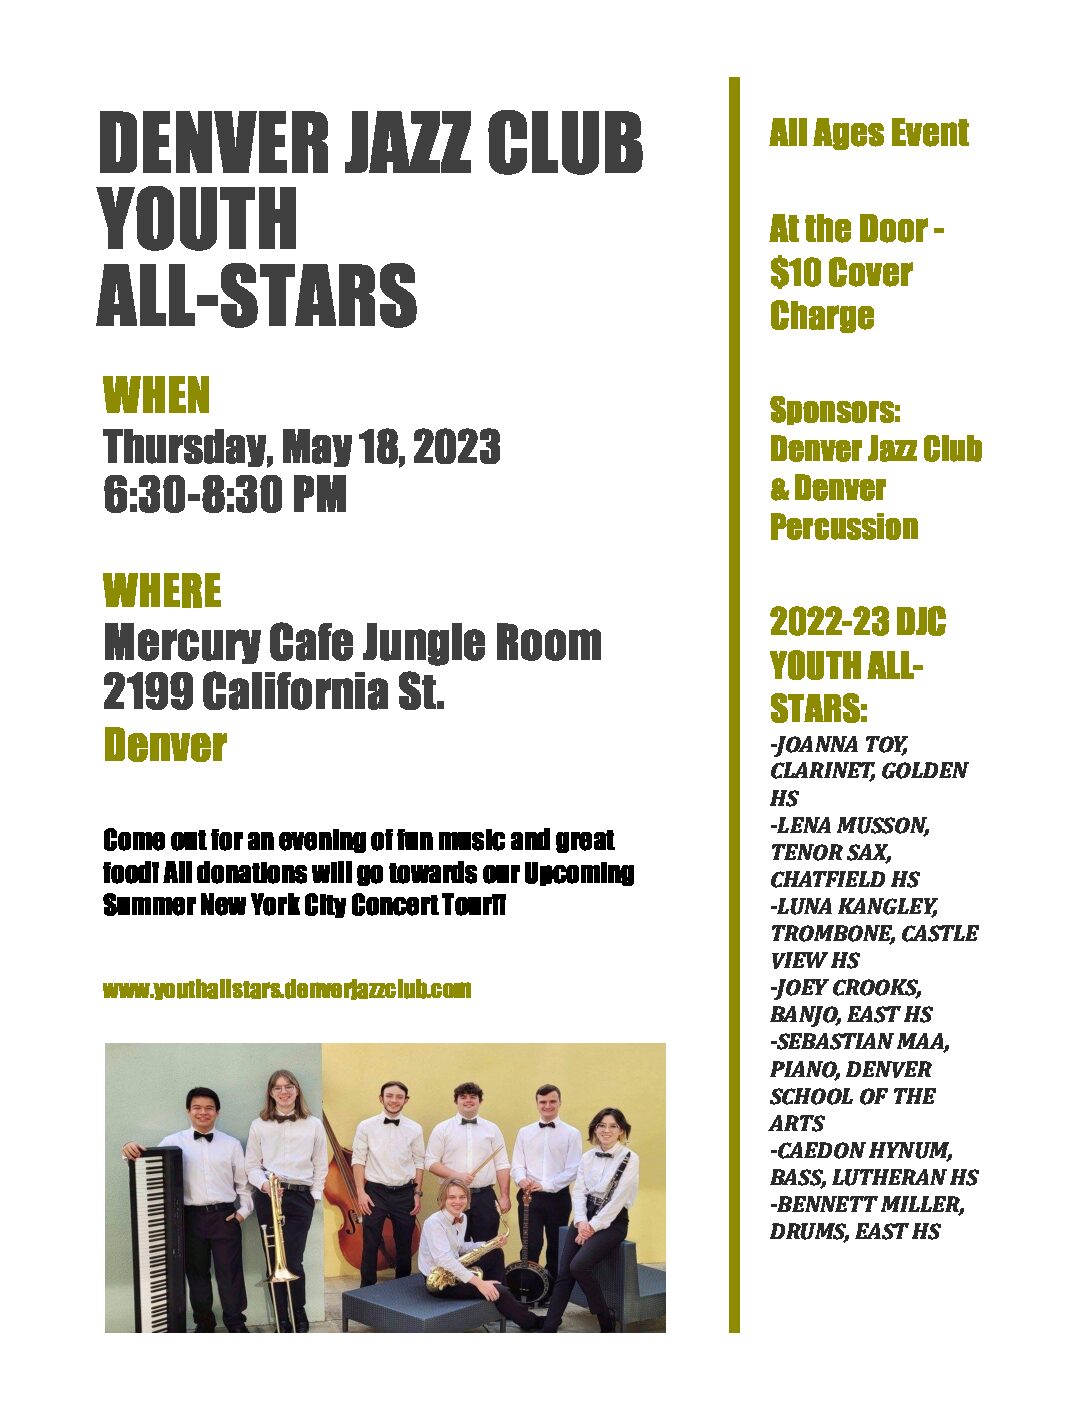 Denver Jazz Club Youth All-Stars to Perform at the Mercury Cafe on Thursday, May 18th (6:30-8:30pm)